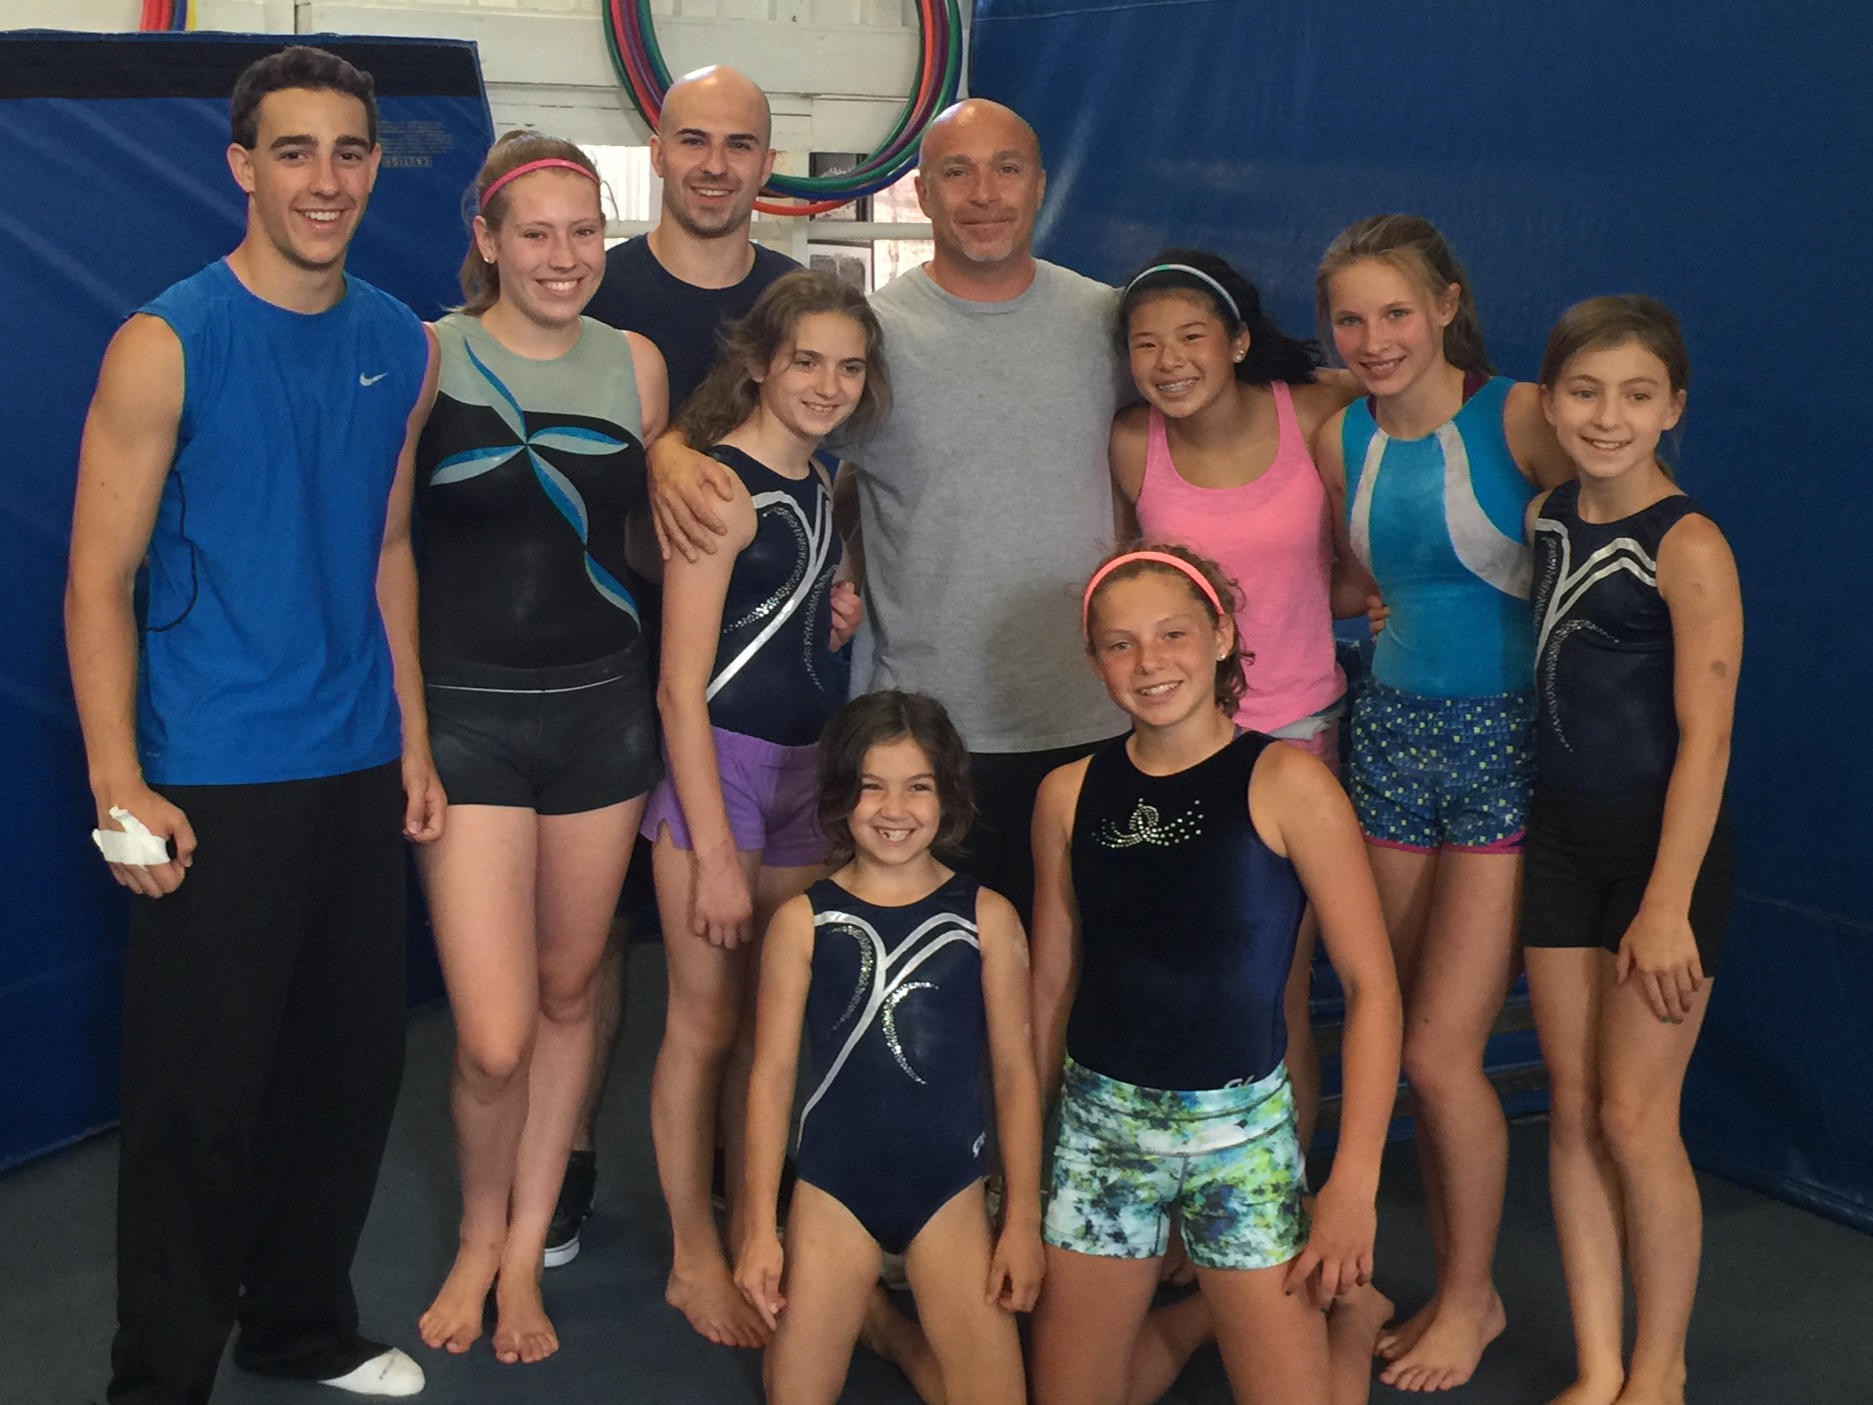 Intensive training week with guest coach Dave!